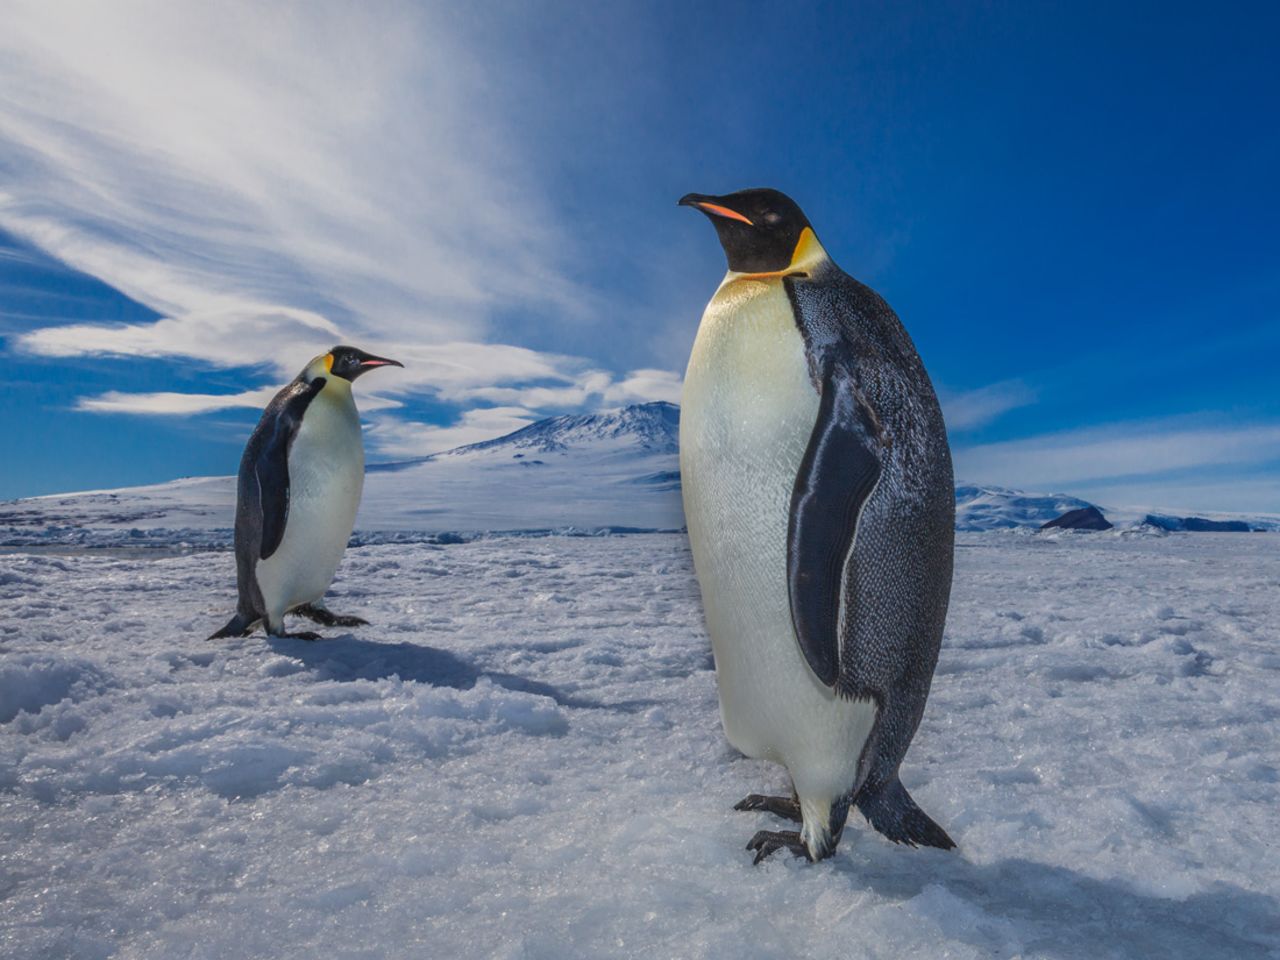 Around the globe, penguins are at risk of extinction due to overfishing and man-made changes to their breeding grounds.<br /><br /><em>Ben Adkison is a freelance photographer based in Montana. His photos from remote corners of the world can be found on </em><a href="https://www.facebook.com/BenAdkisonPhotography" target="_blank" target="_blank"><em>Facebook</em></a><em> and his </em><a href="http://www.benadkisonphotography.com/" target="_blank" target="_blank"><em>website</em></a>.